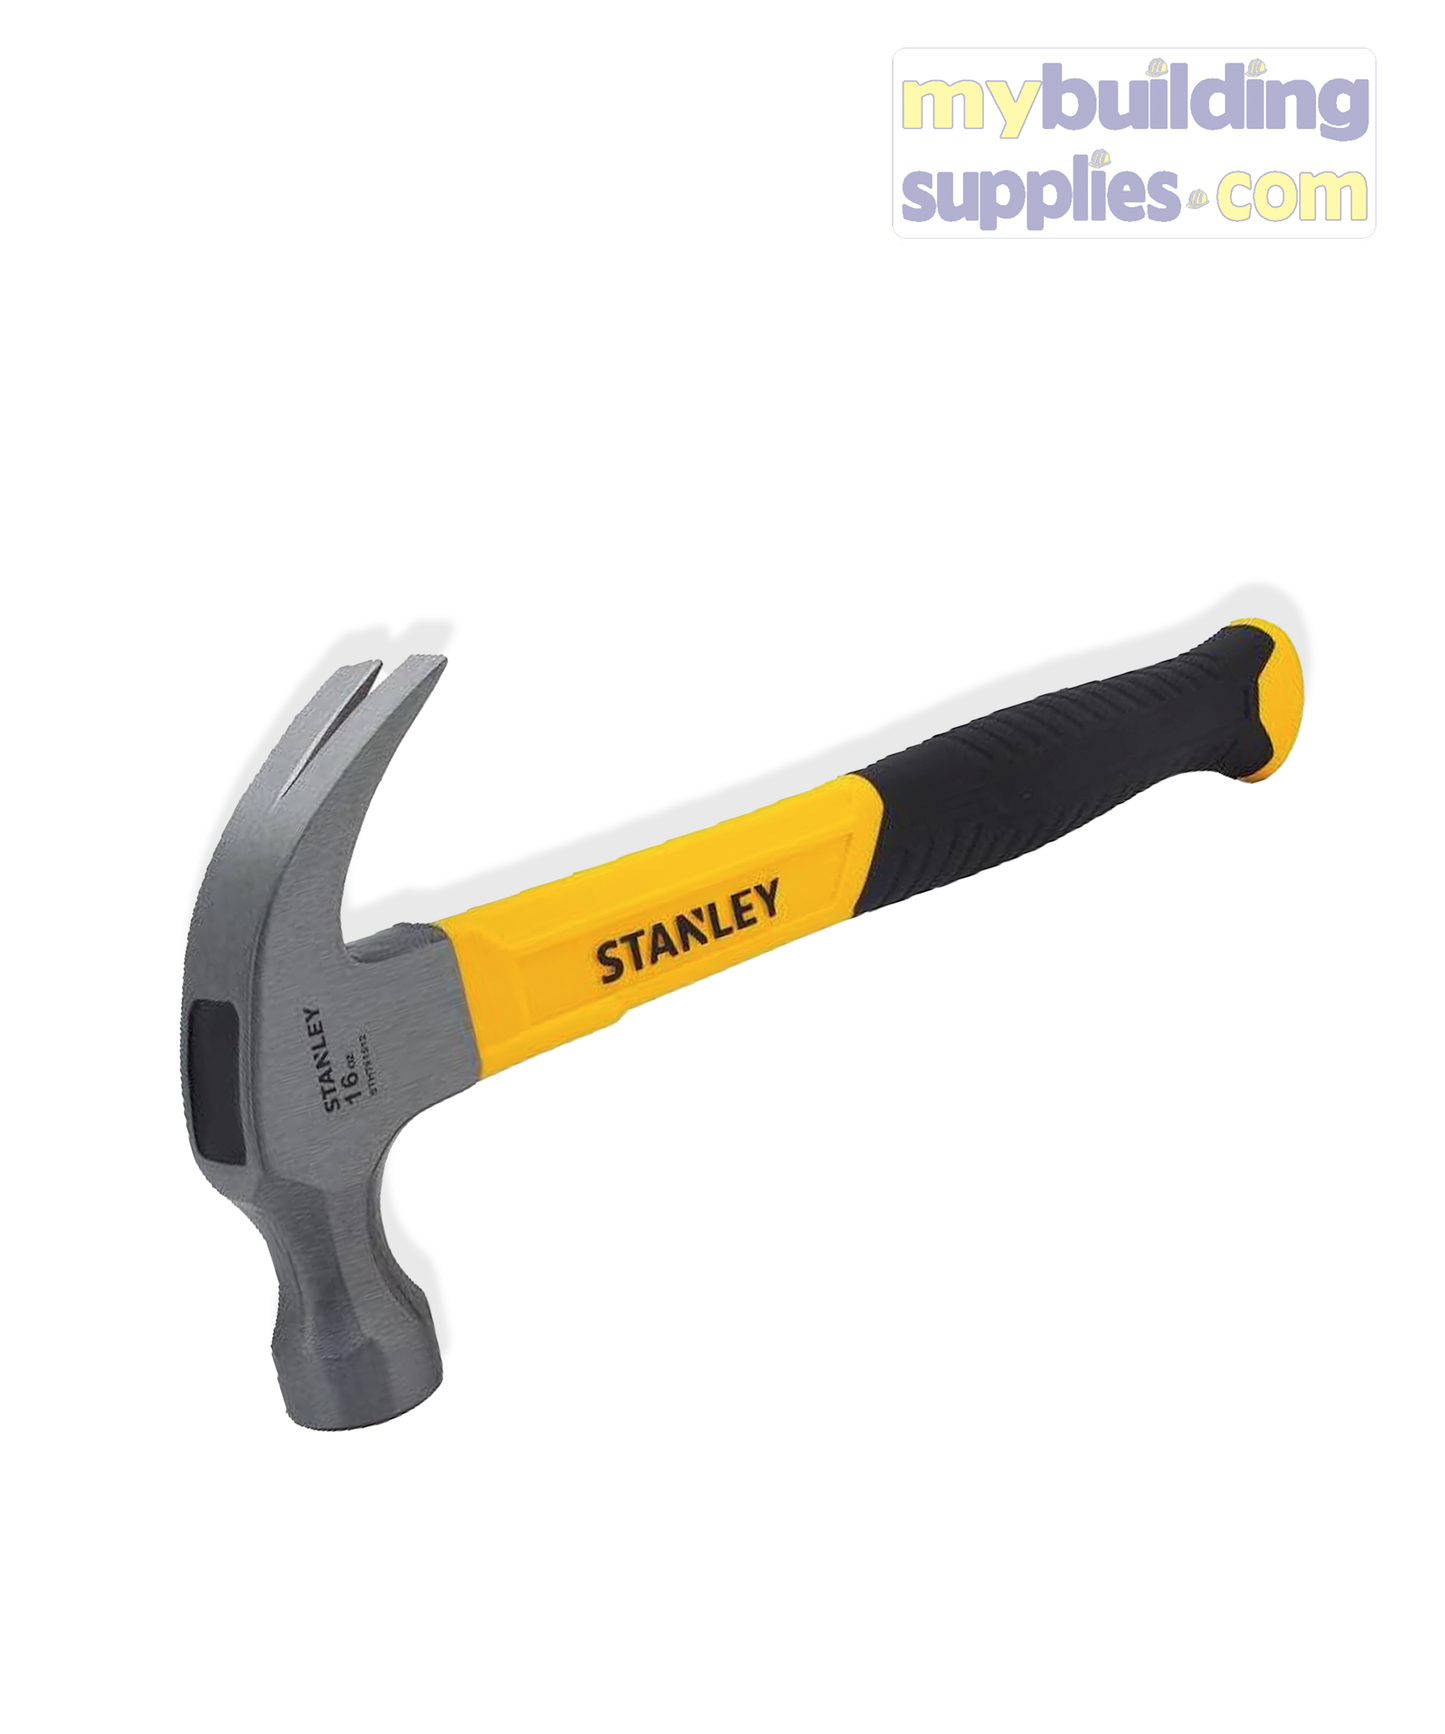 16oz Stanley Hammer with Rubber Handle